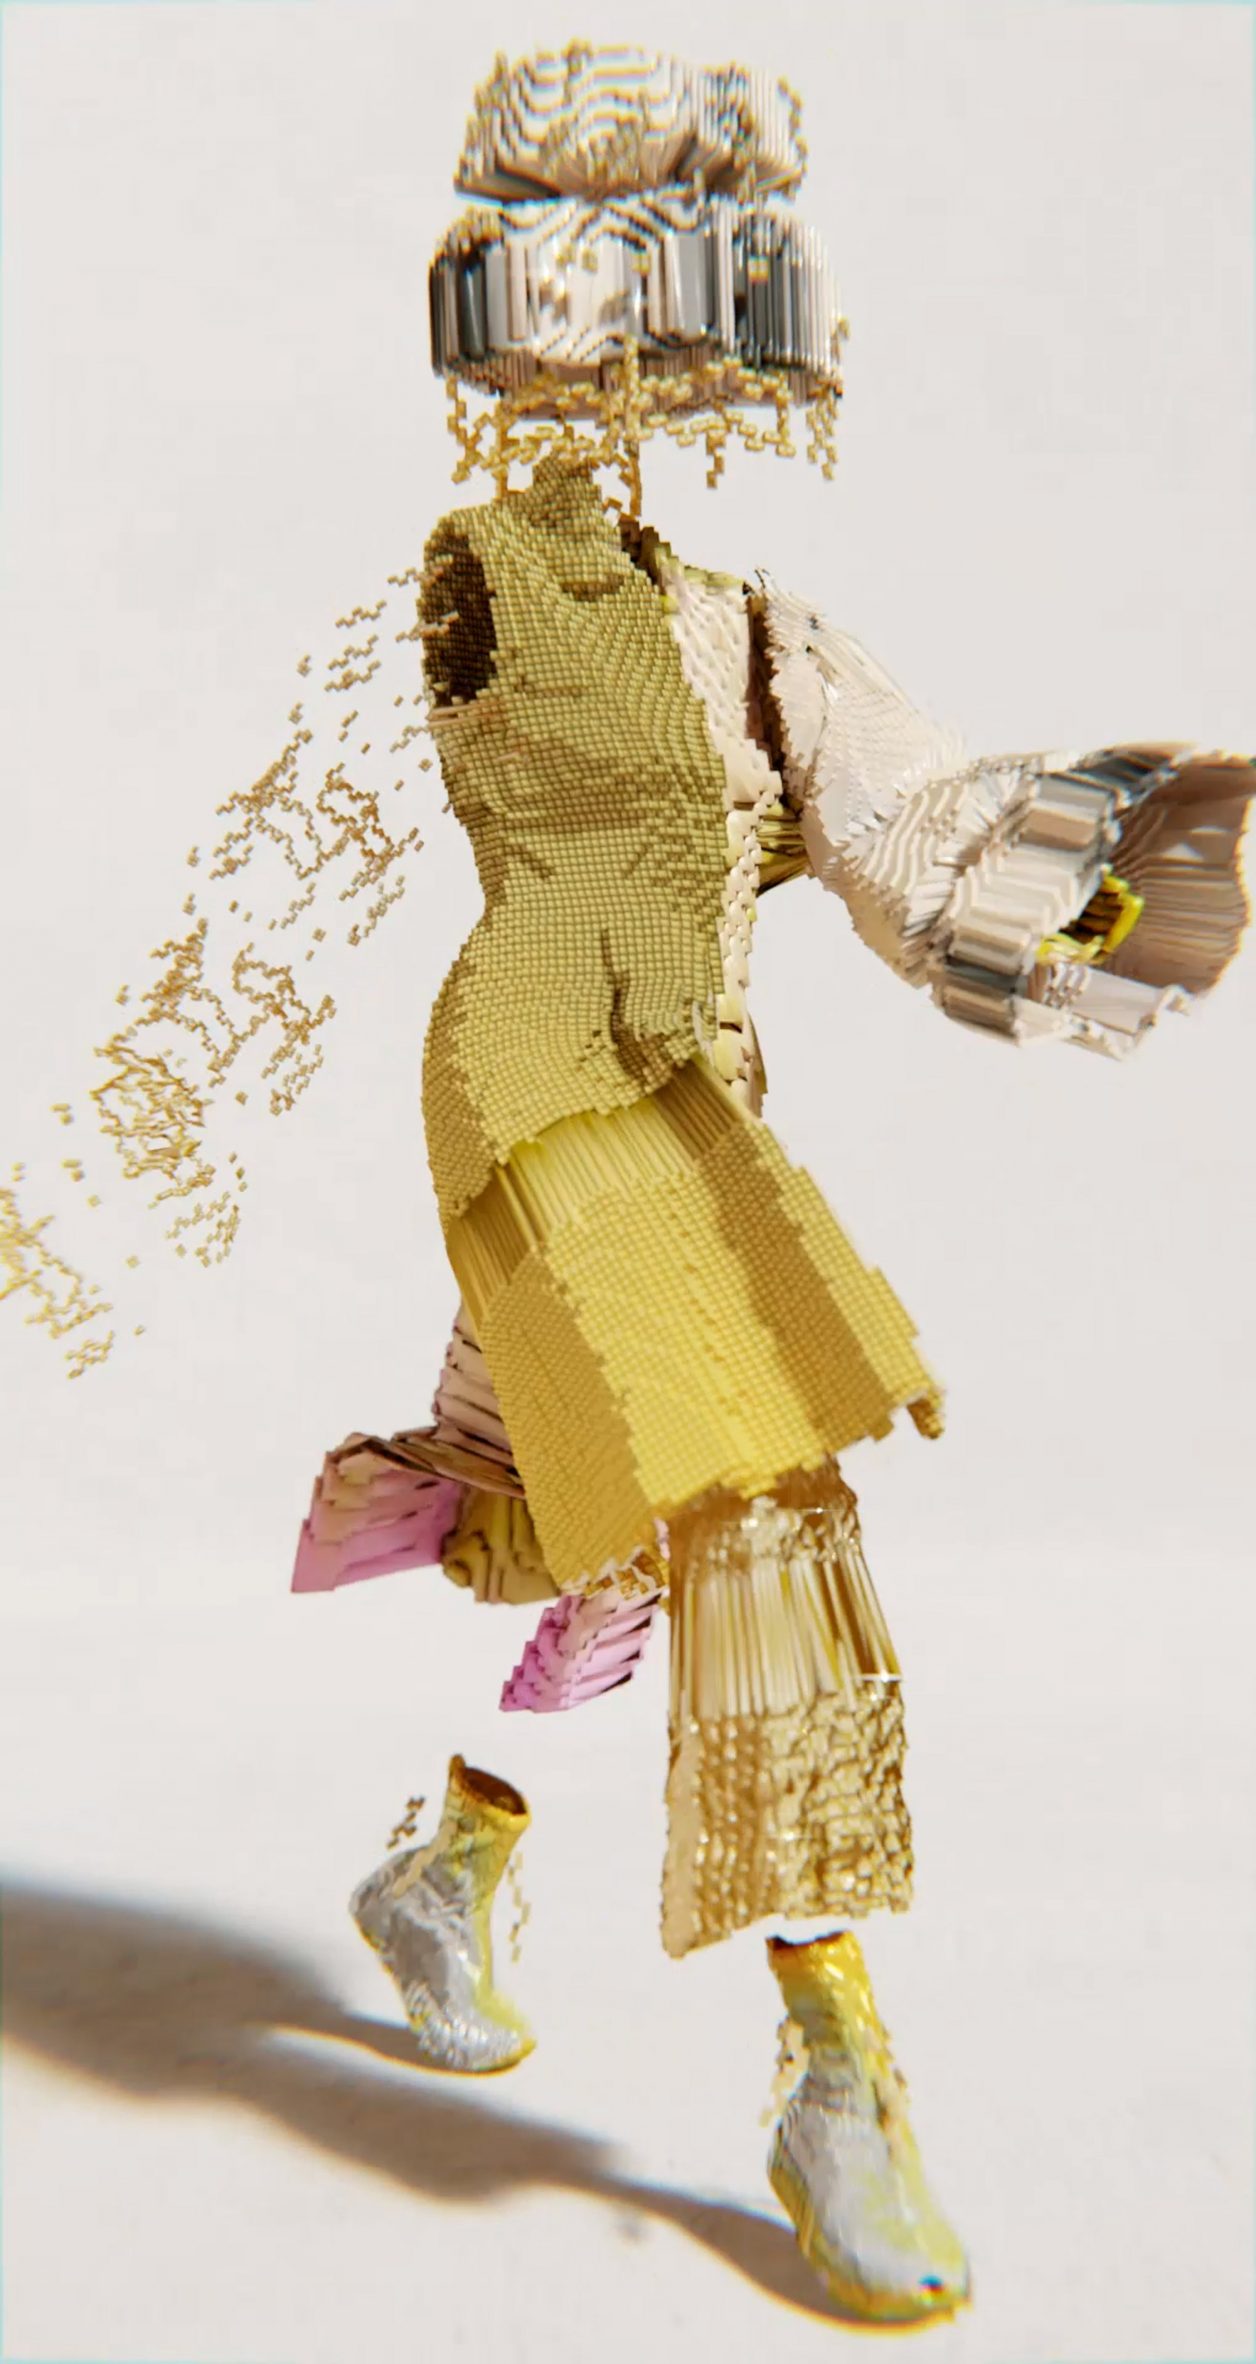 The Decrypted Garments collection included a gold look pictured mid-walk